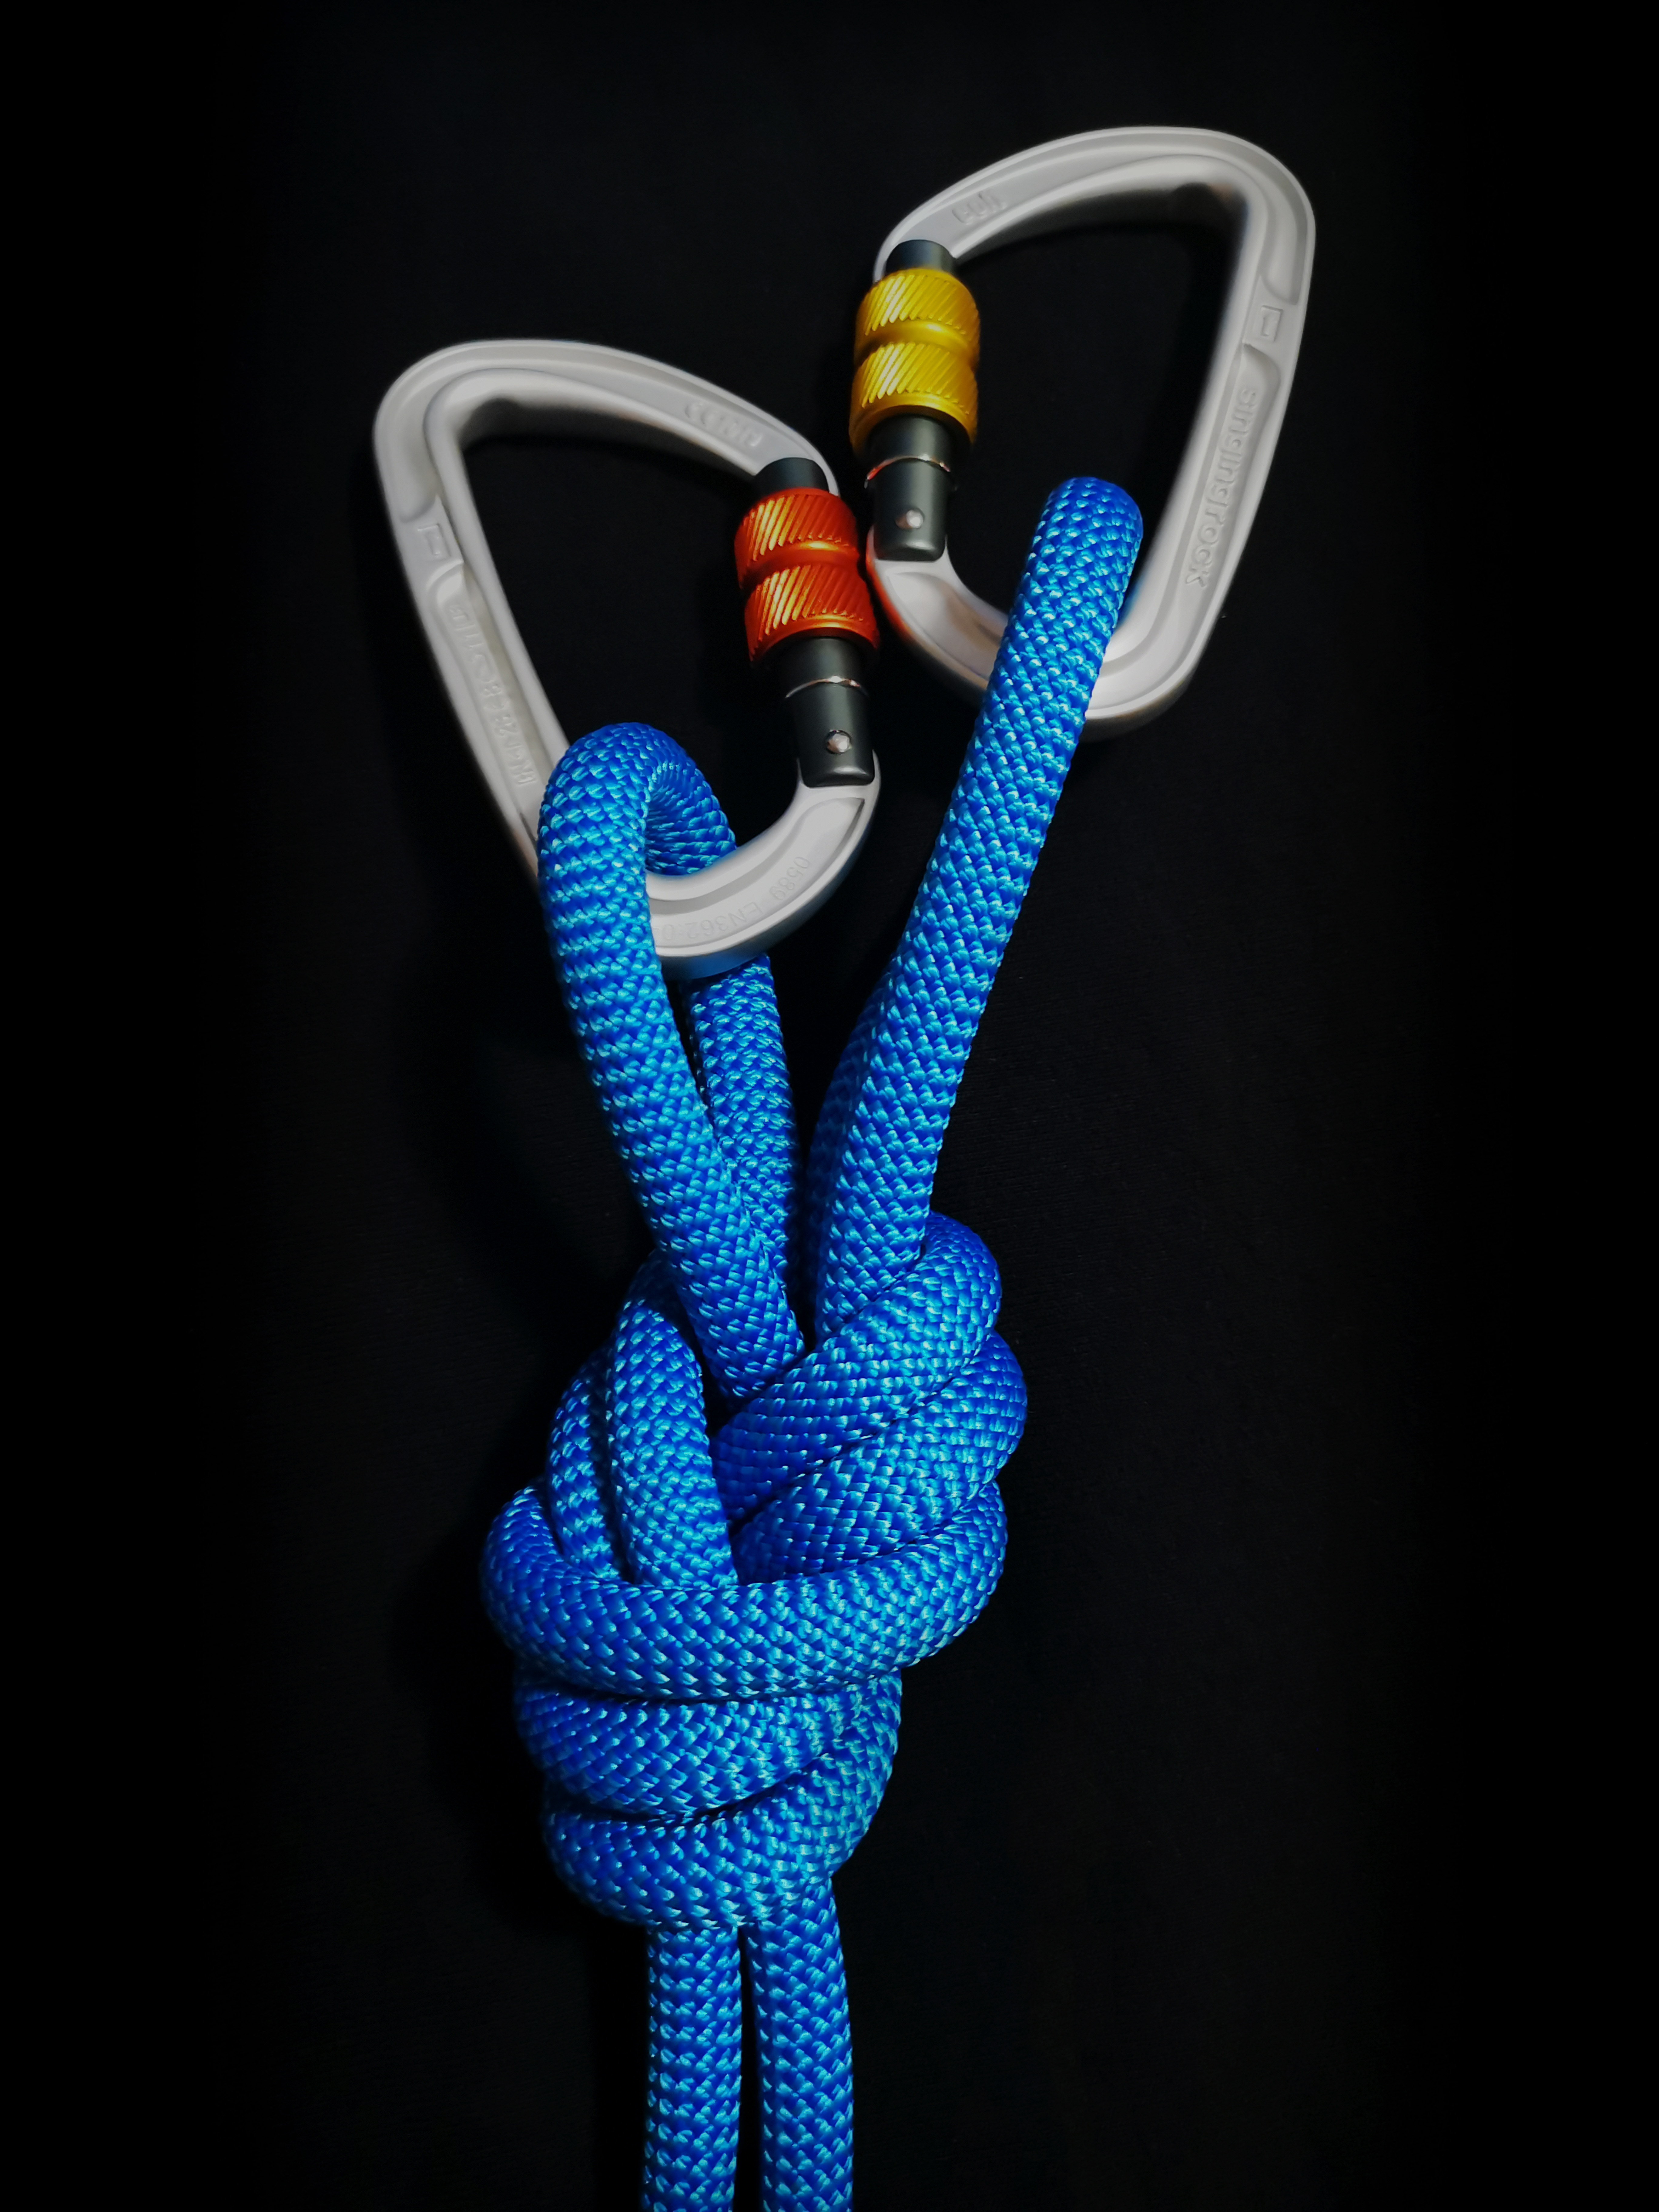 General 5472x7296 ropes knot carabiner climbing rock climbing closeup simple background portrait display